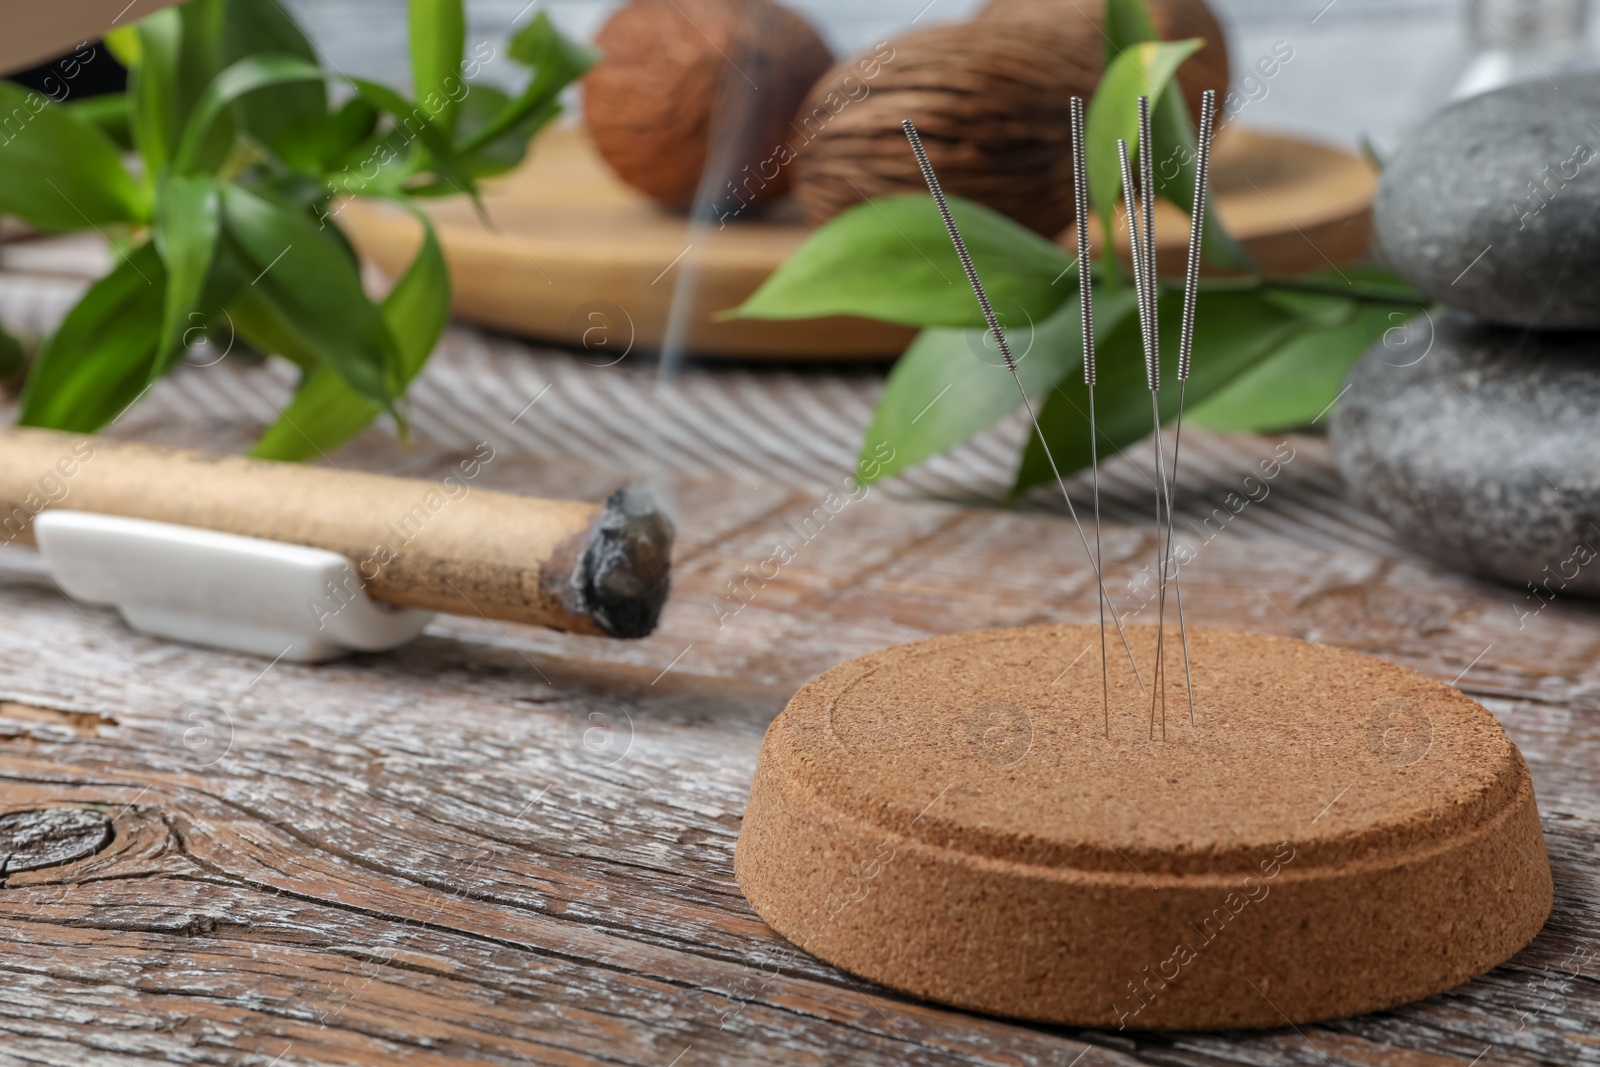 Photo of Cork stand with needles for acupuncture on wooden table